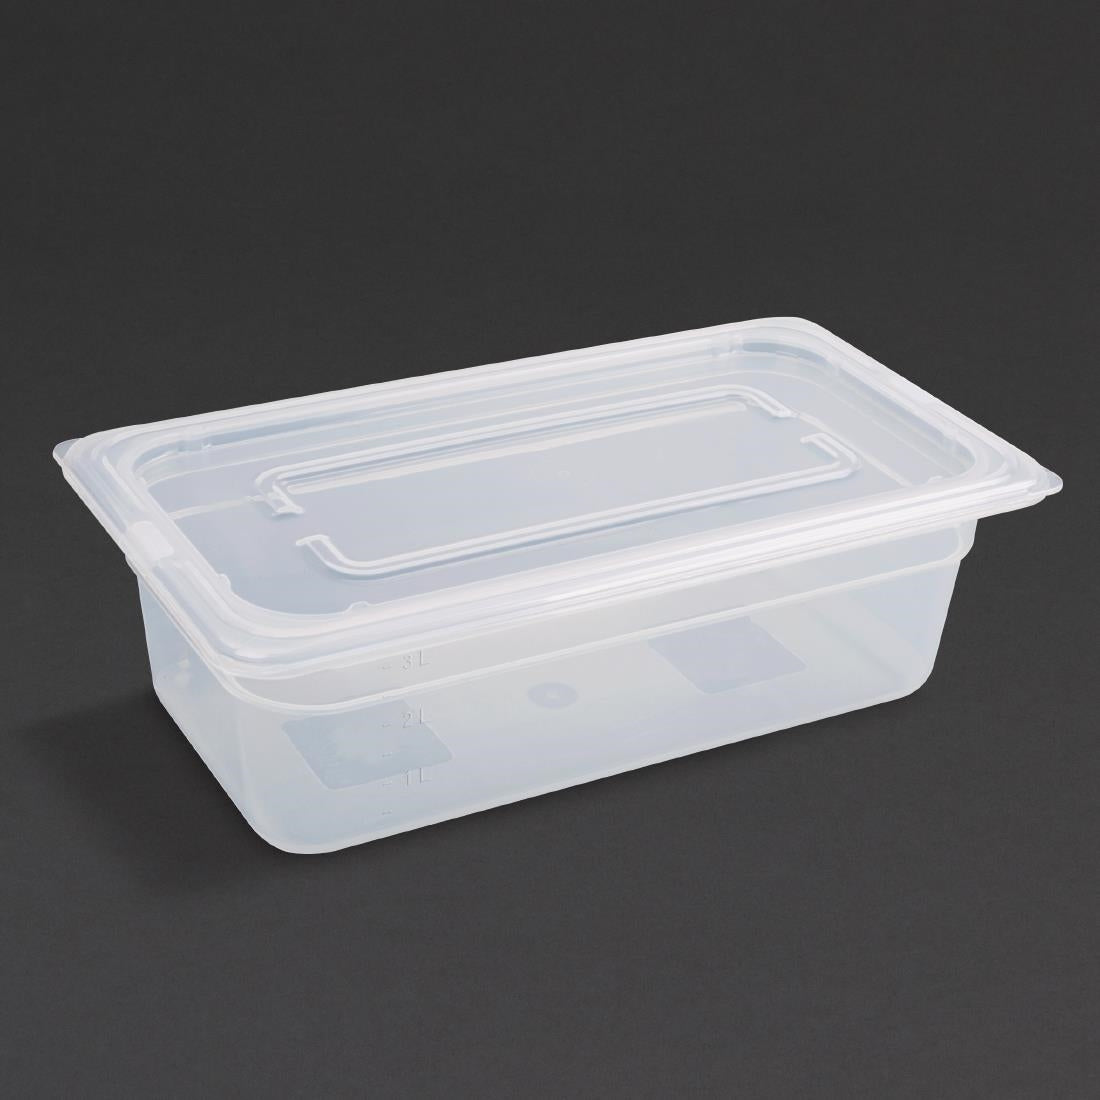 Vogue Polypropylene 1/6 Gastronorm Tray 100mm